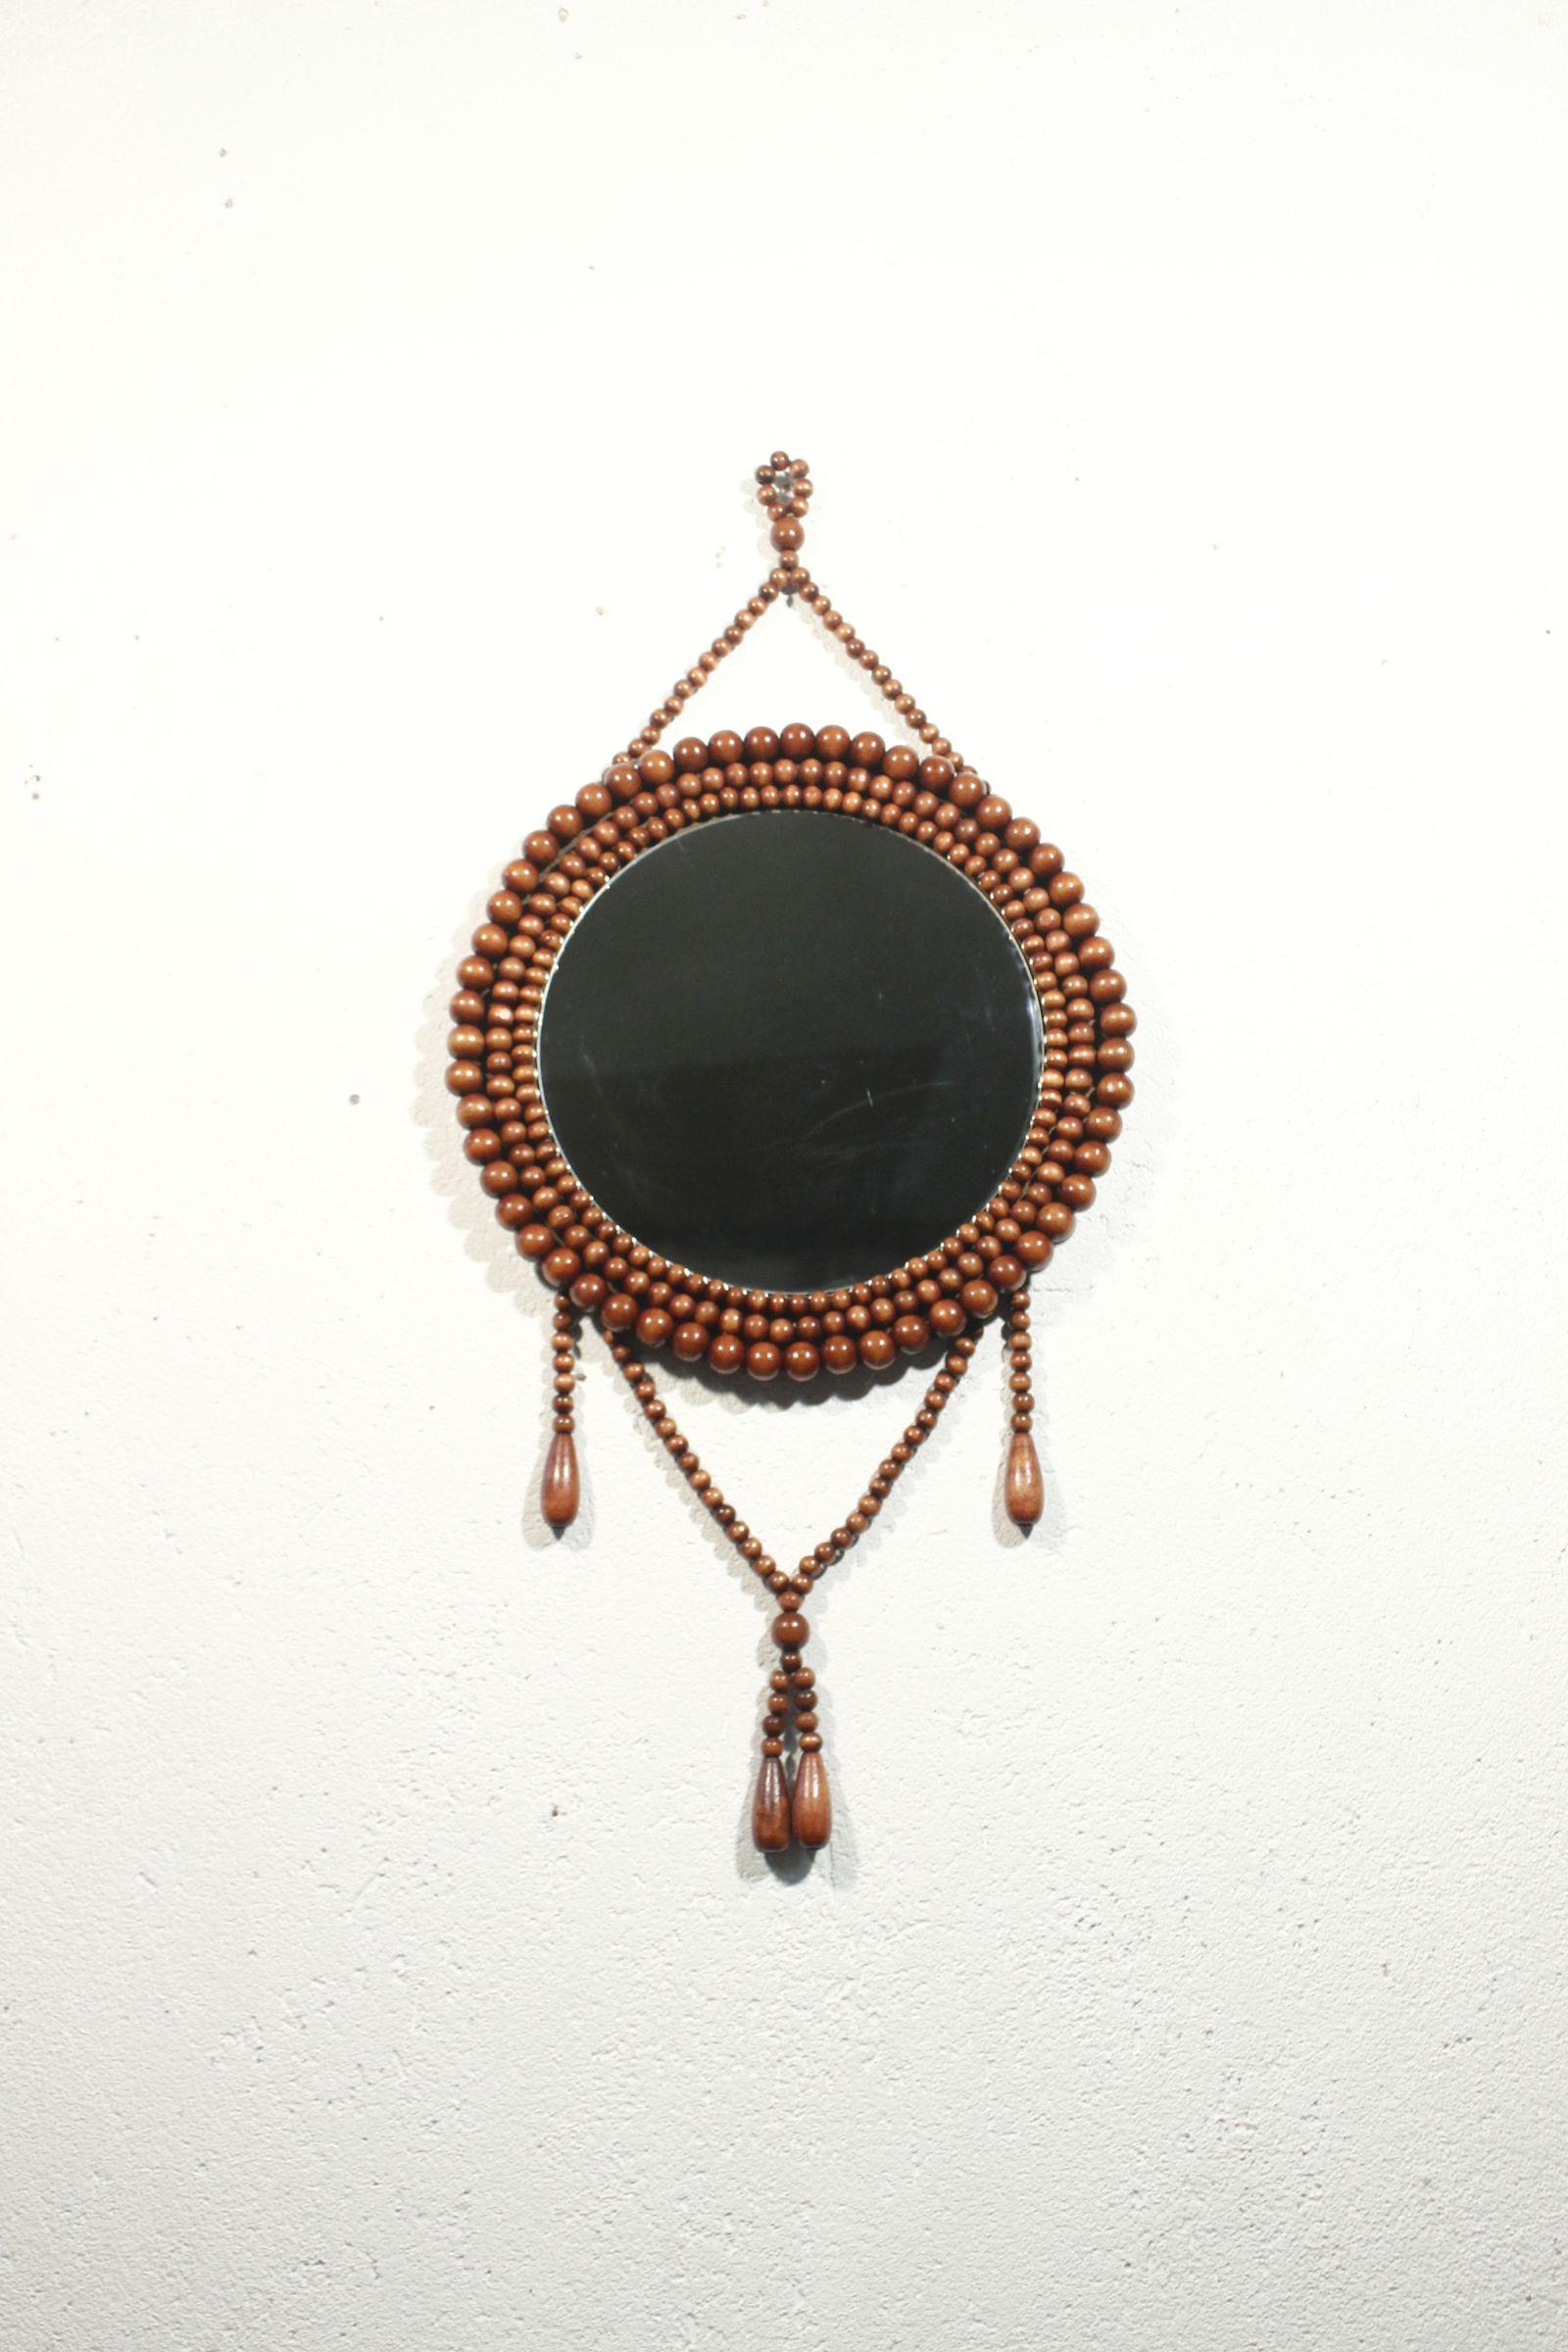 Beautiful wall mirror circa 1970 in turned and varnished wood beads, typical of Finnish production of the period, design strongly inspired by the work of Kaija Aarikka. 

In very good condition overall, with rare signs of use on the mirror. 